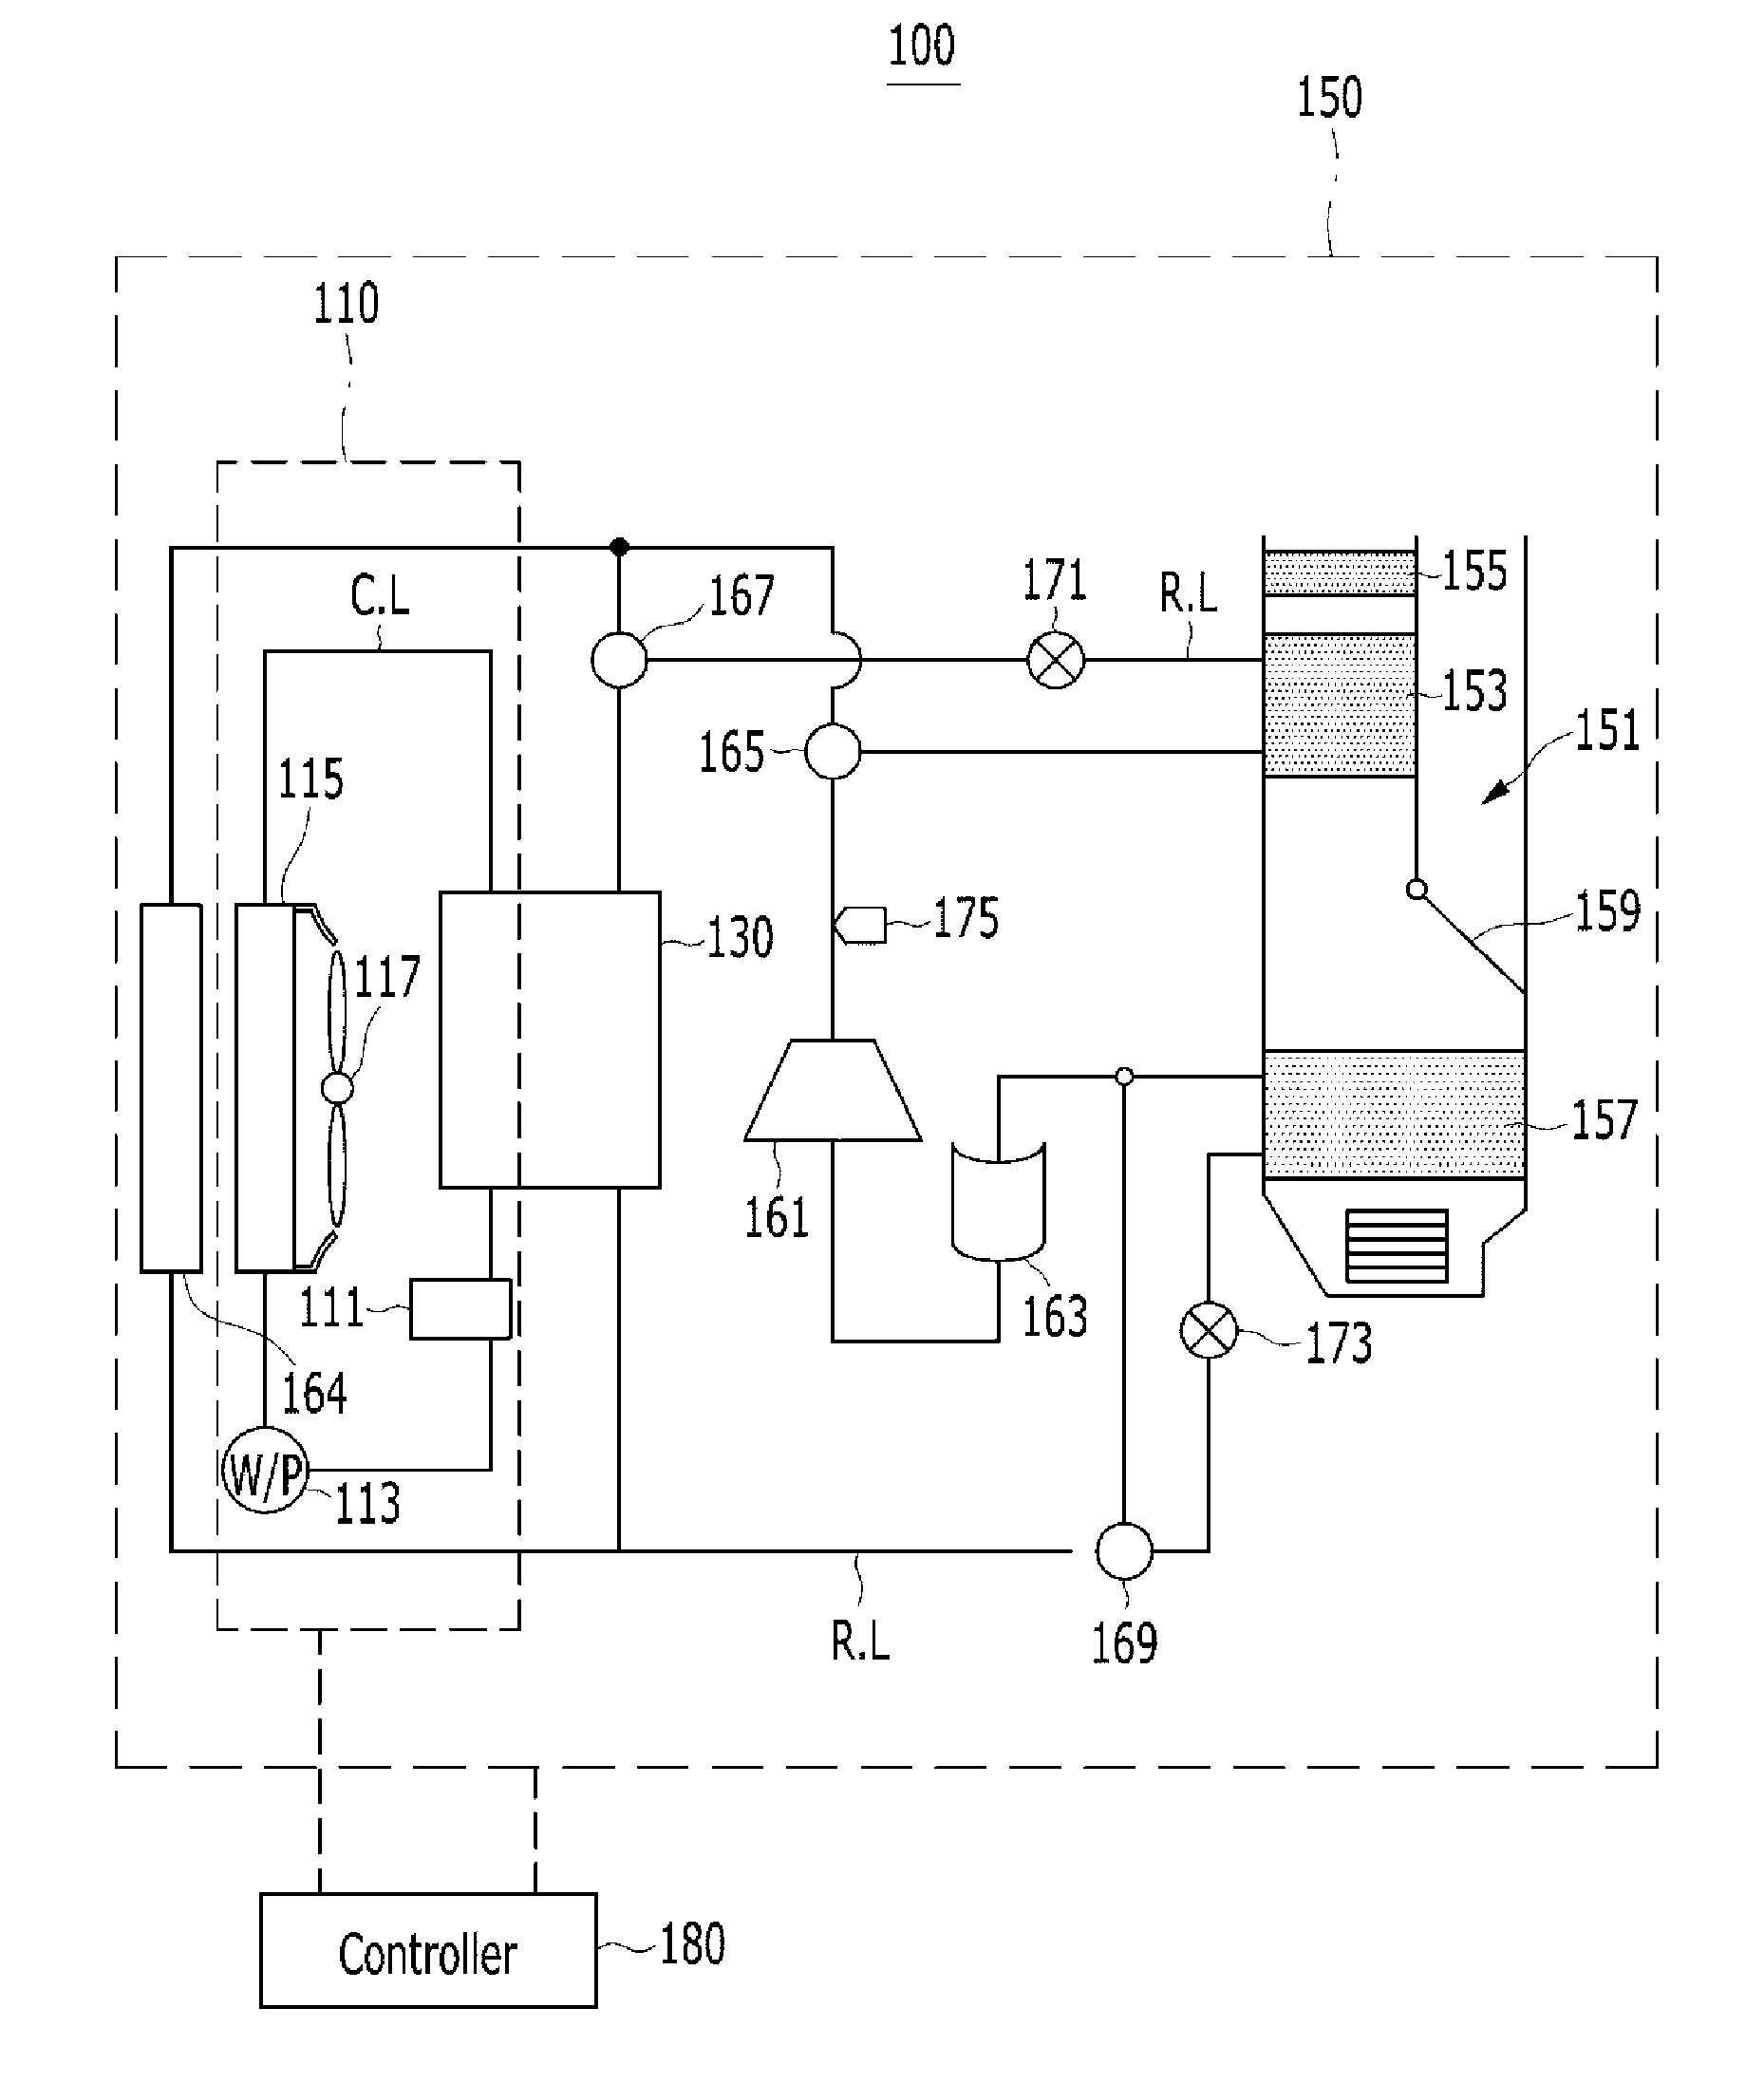 Heat pump system for vehicle